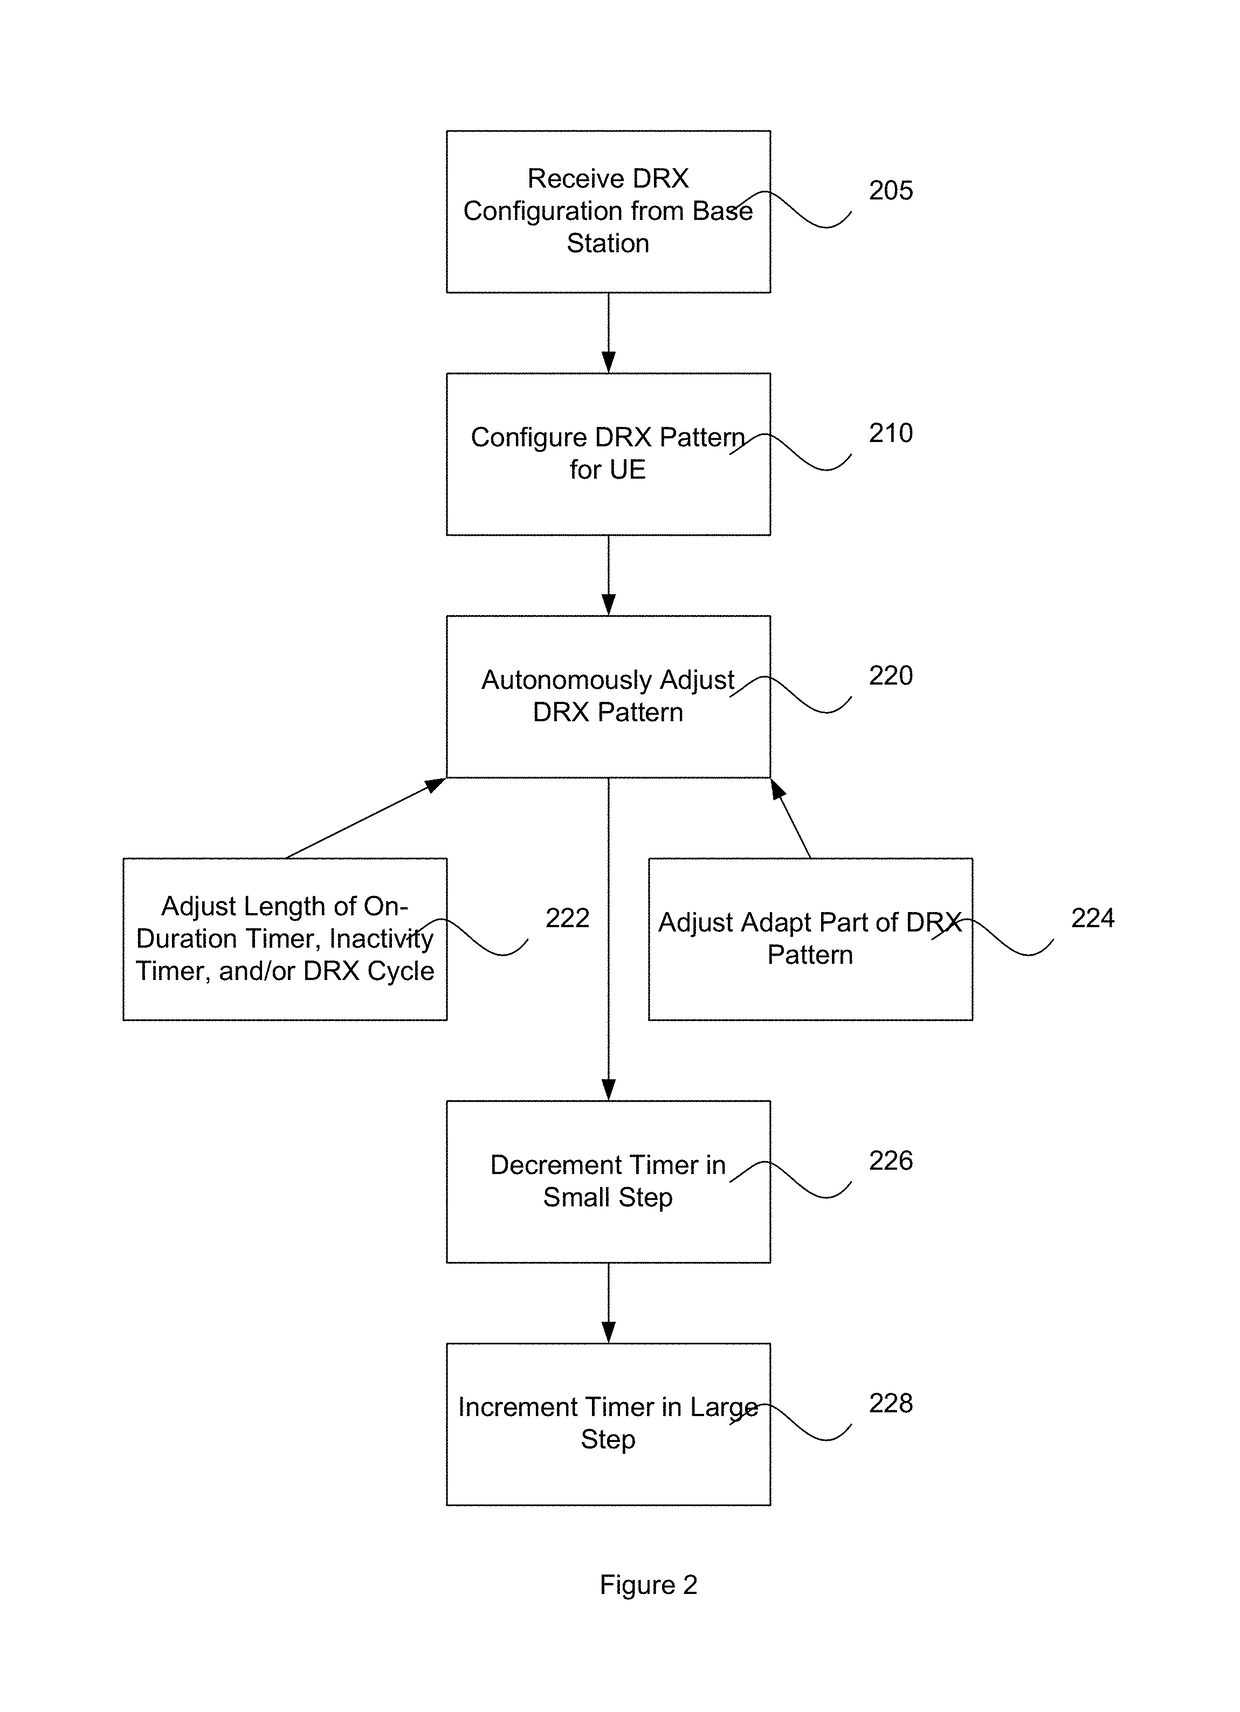 Self-adjusting discontinuous reception pattern